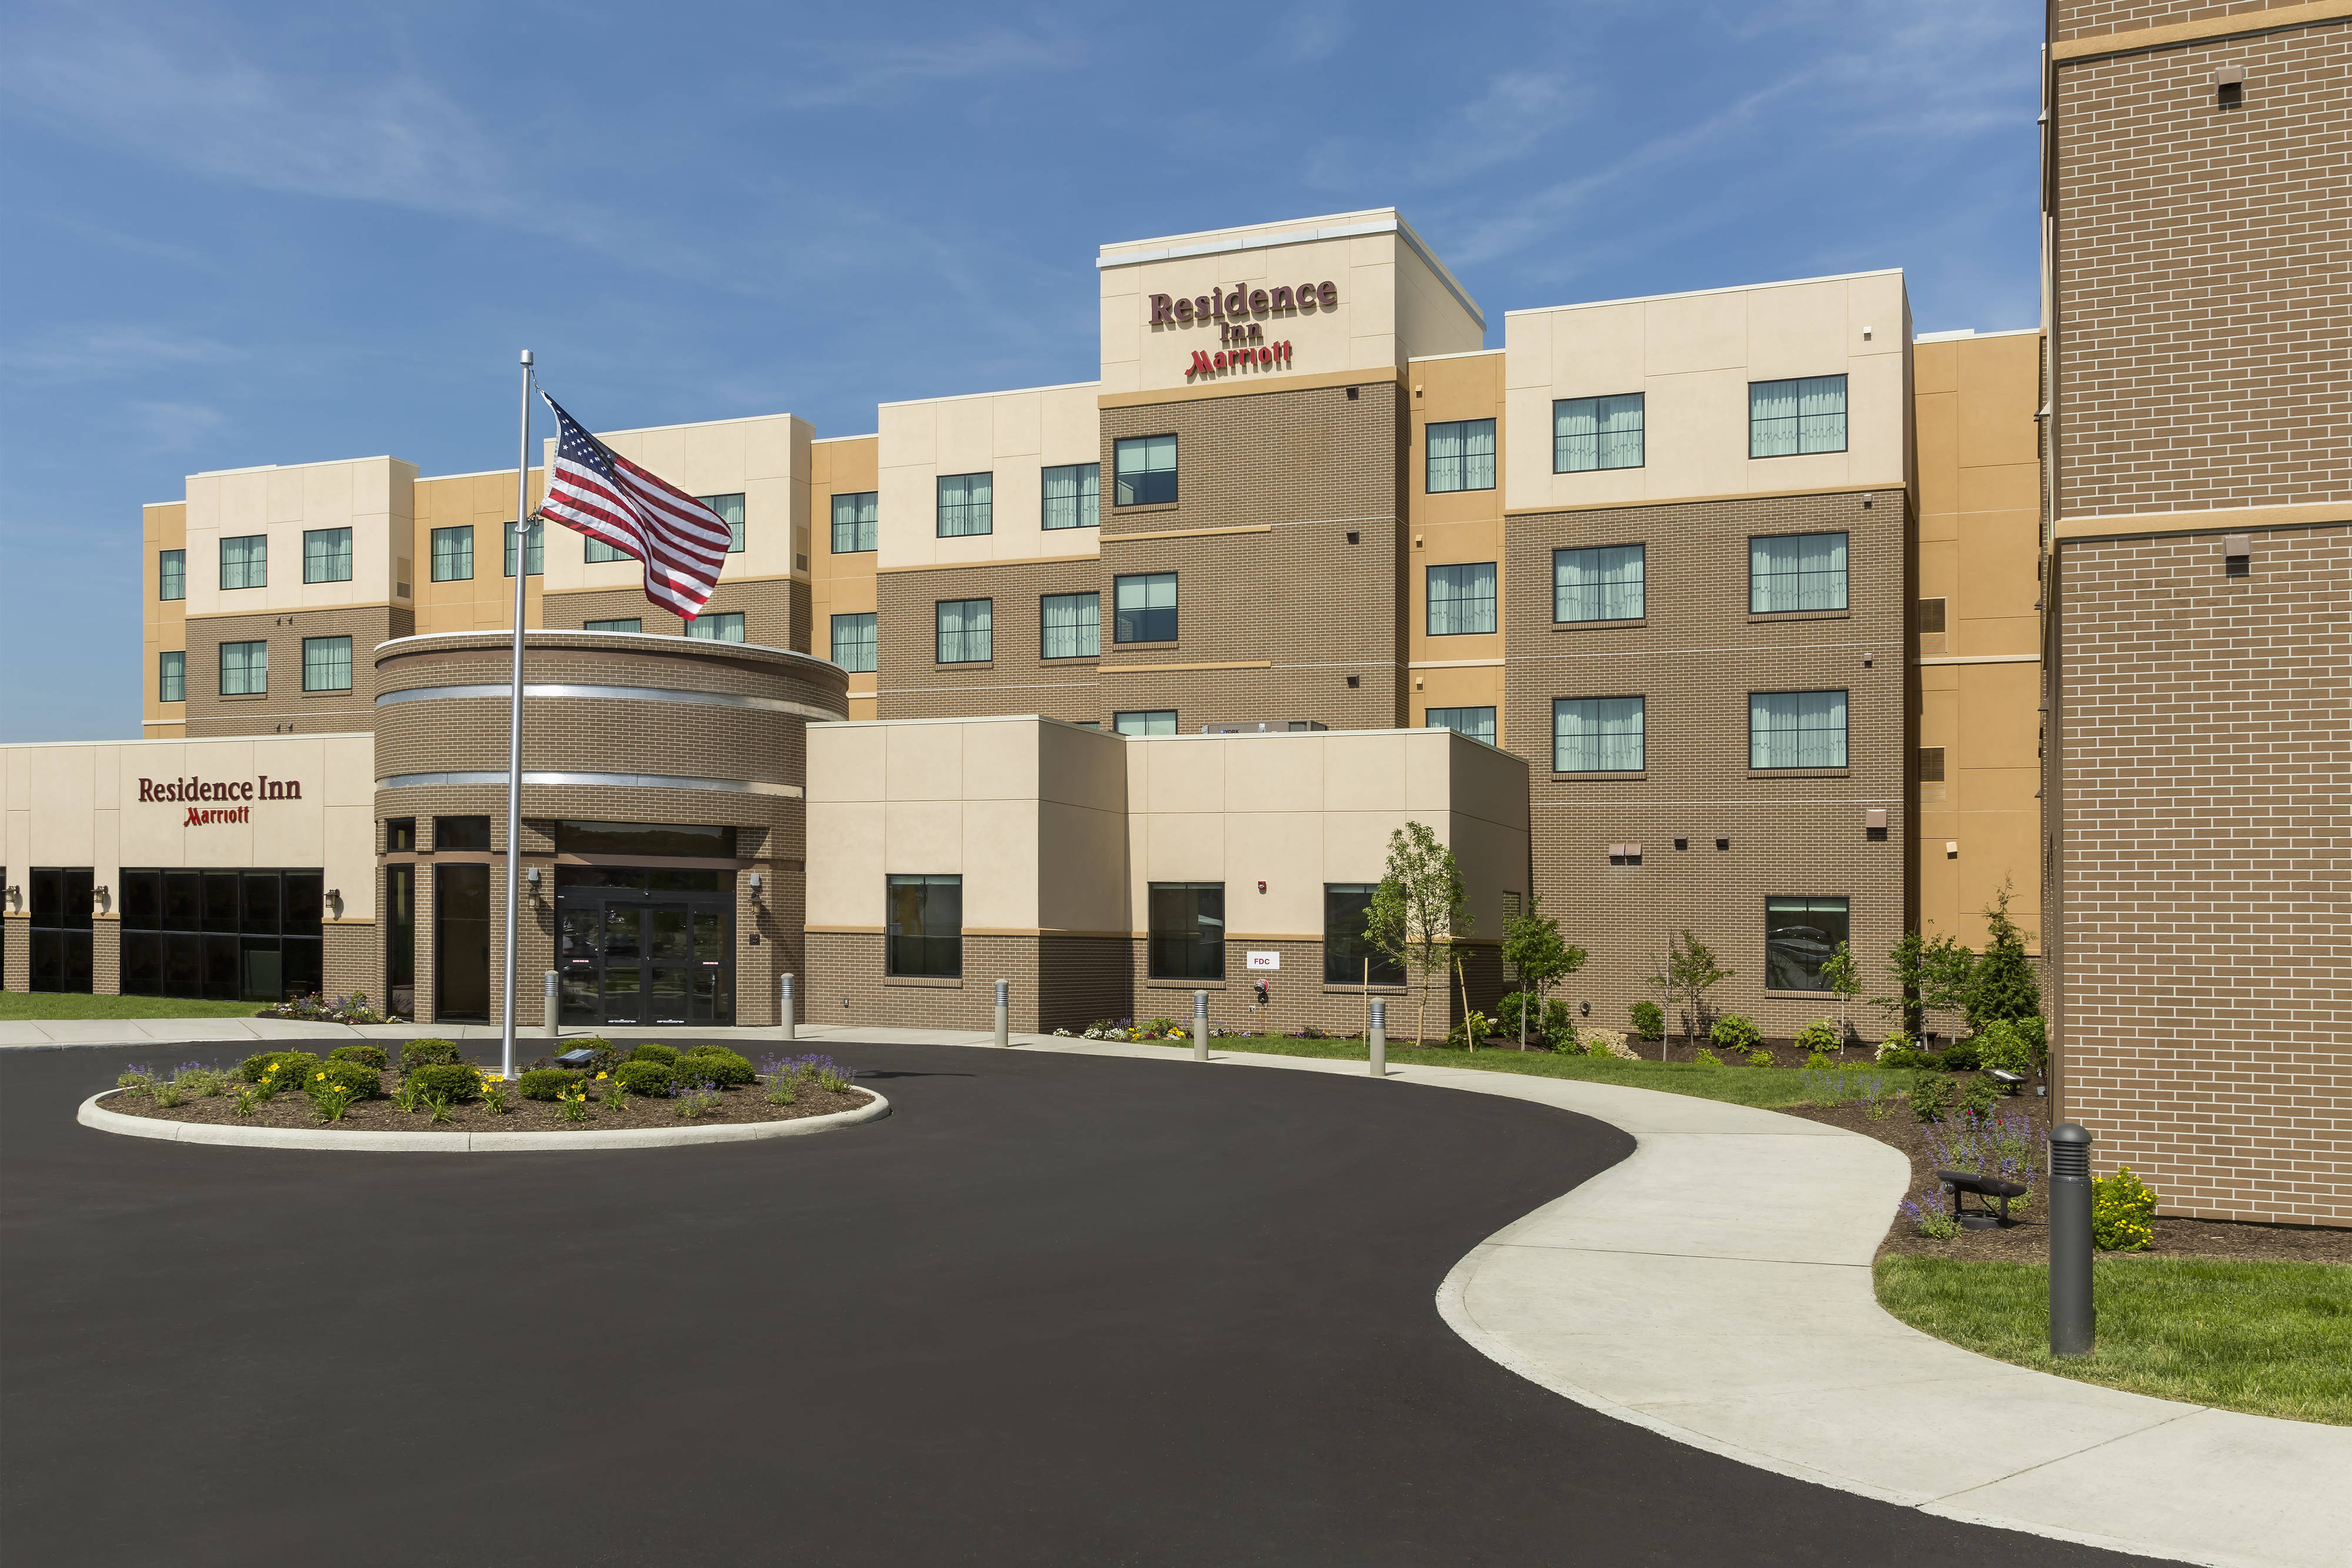 Photo of Residence Inn by Marriott Youngstown Warren/Niles, Niles, OH